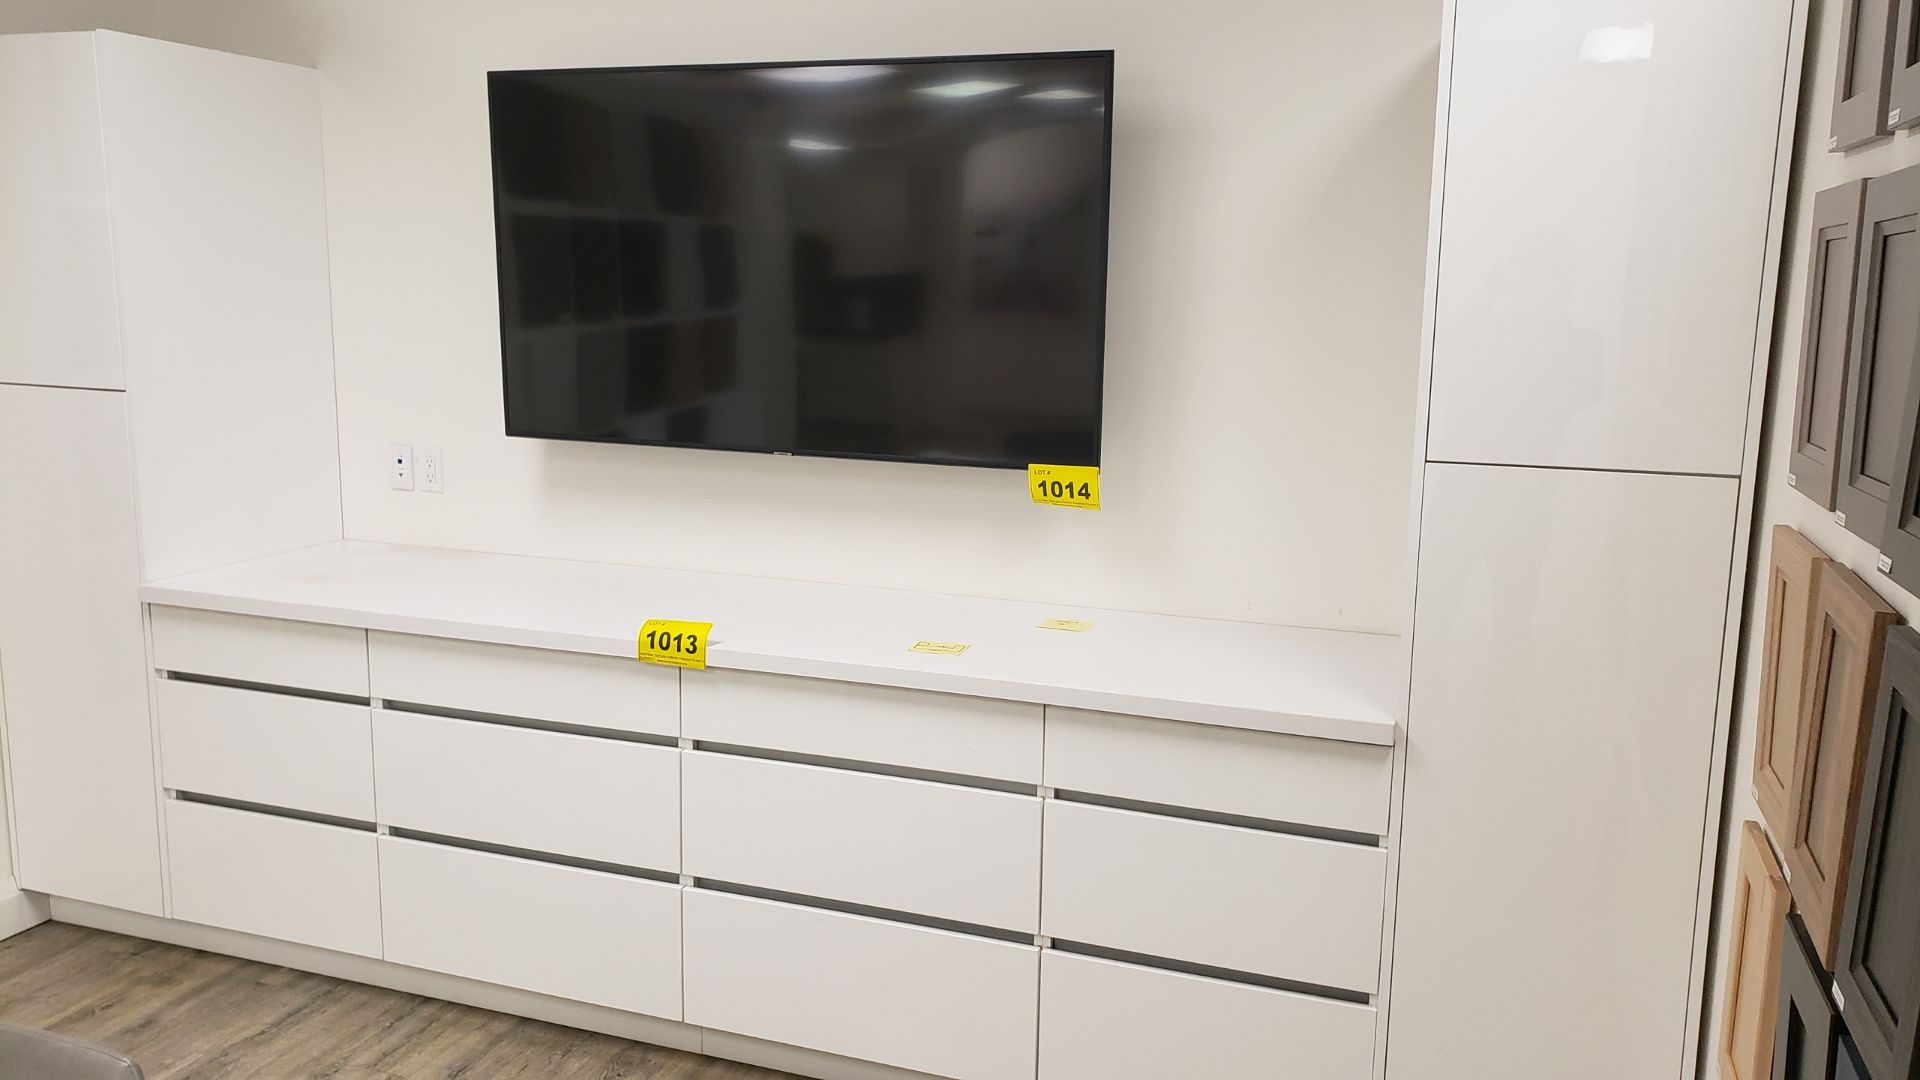 SHOWROOM DISPLAY ENTERTAINMENT UNIT, 147"L OVERALL, 108"L BETWEEN CABINETS, 84"W W/ CABINETRY - Image 2 of 4